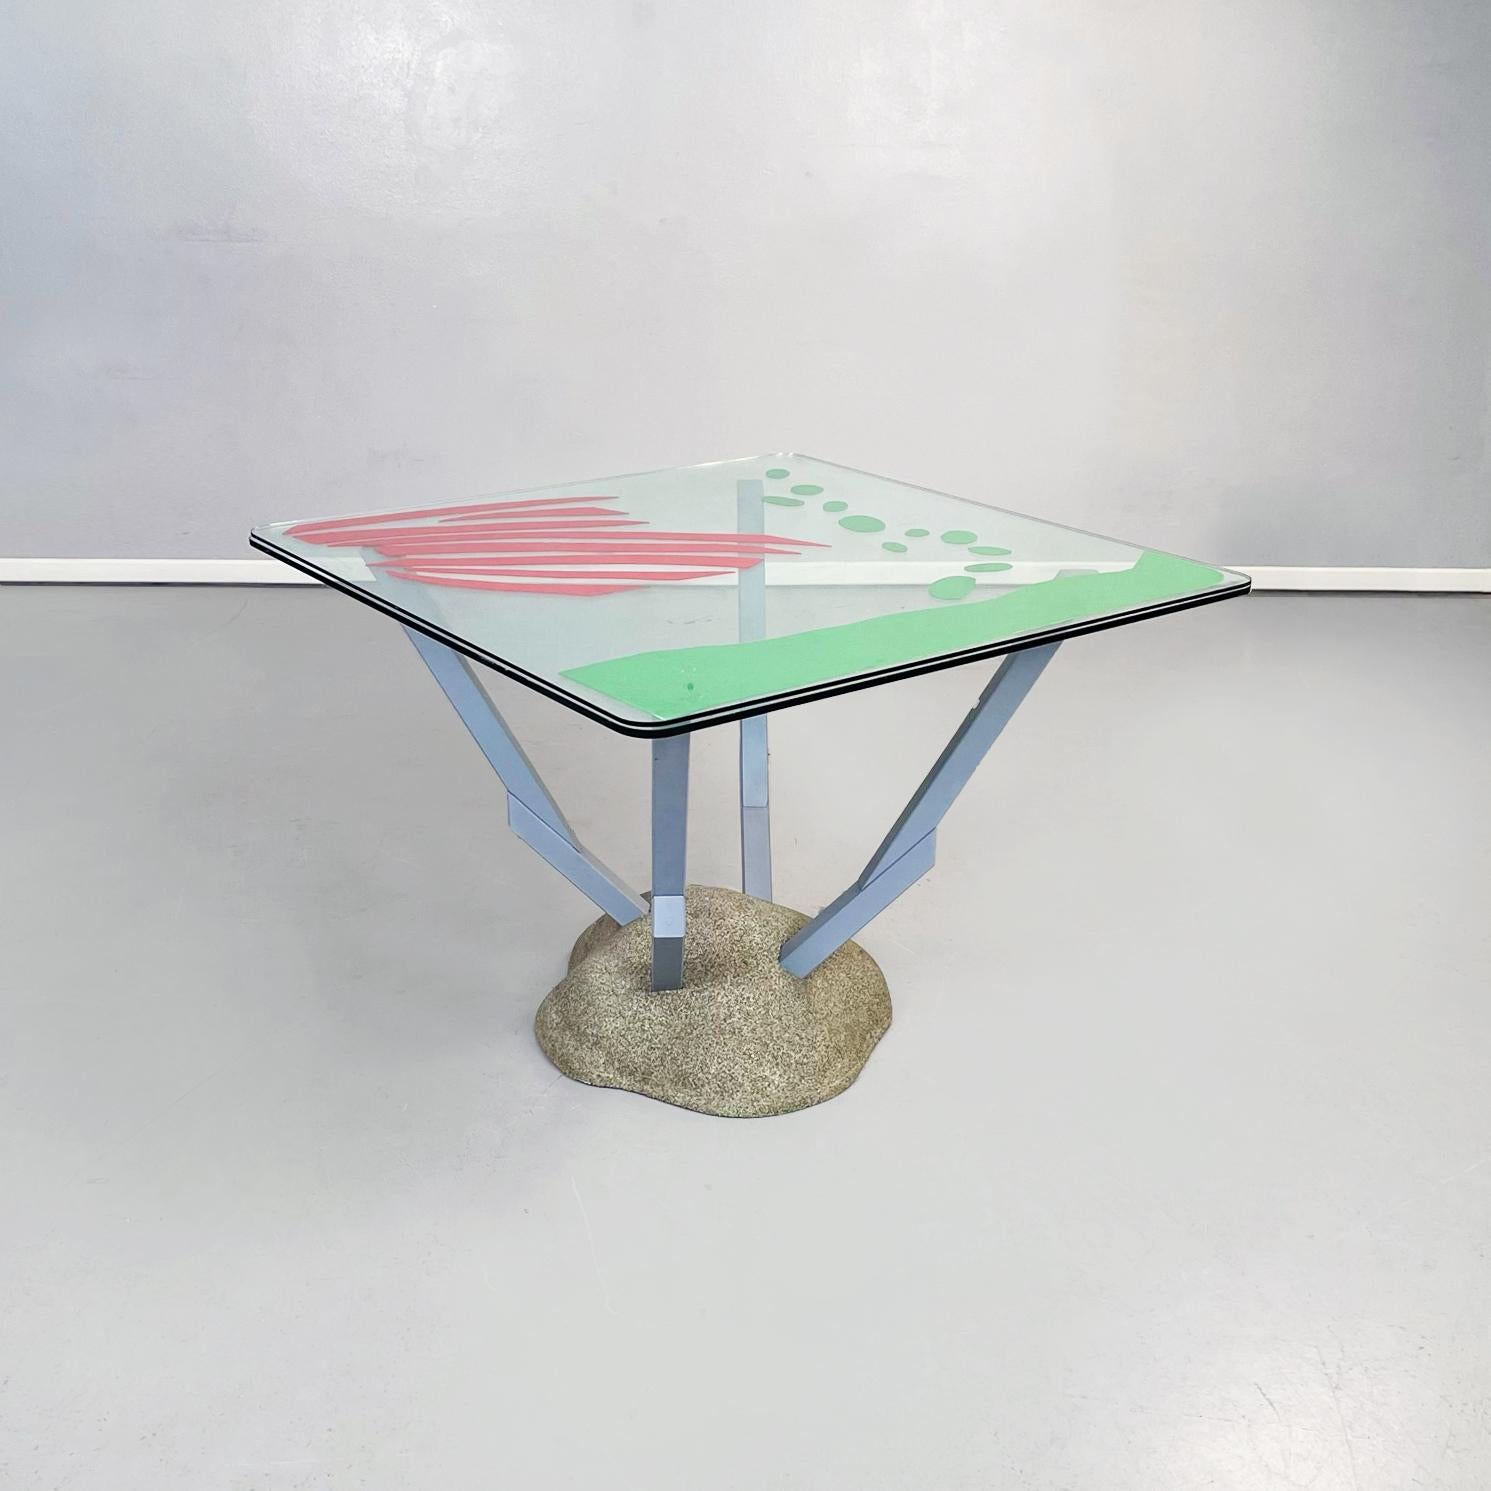 Italian modern Glass, fabric and wood Table Artifici by Paolo Deganello for Cassina, 1985
Dining table mod. Artifici with square glass top with rounded corners. The top is made up of two superimposed glass plates, in the middle of which there are